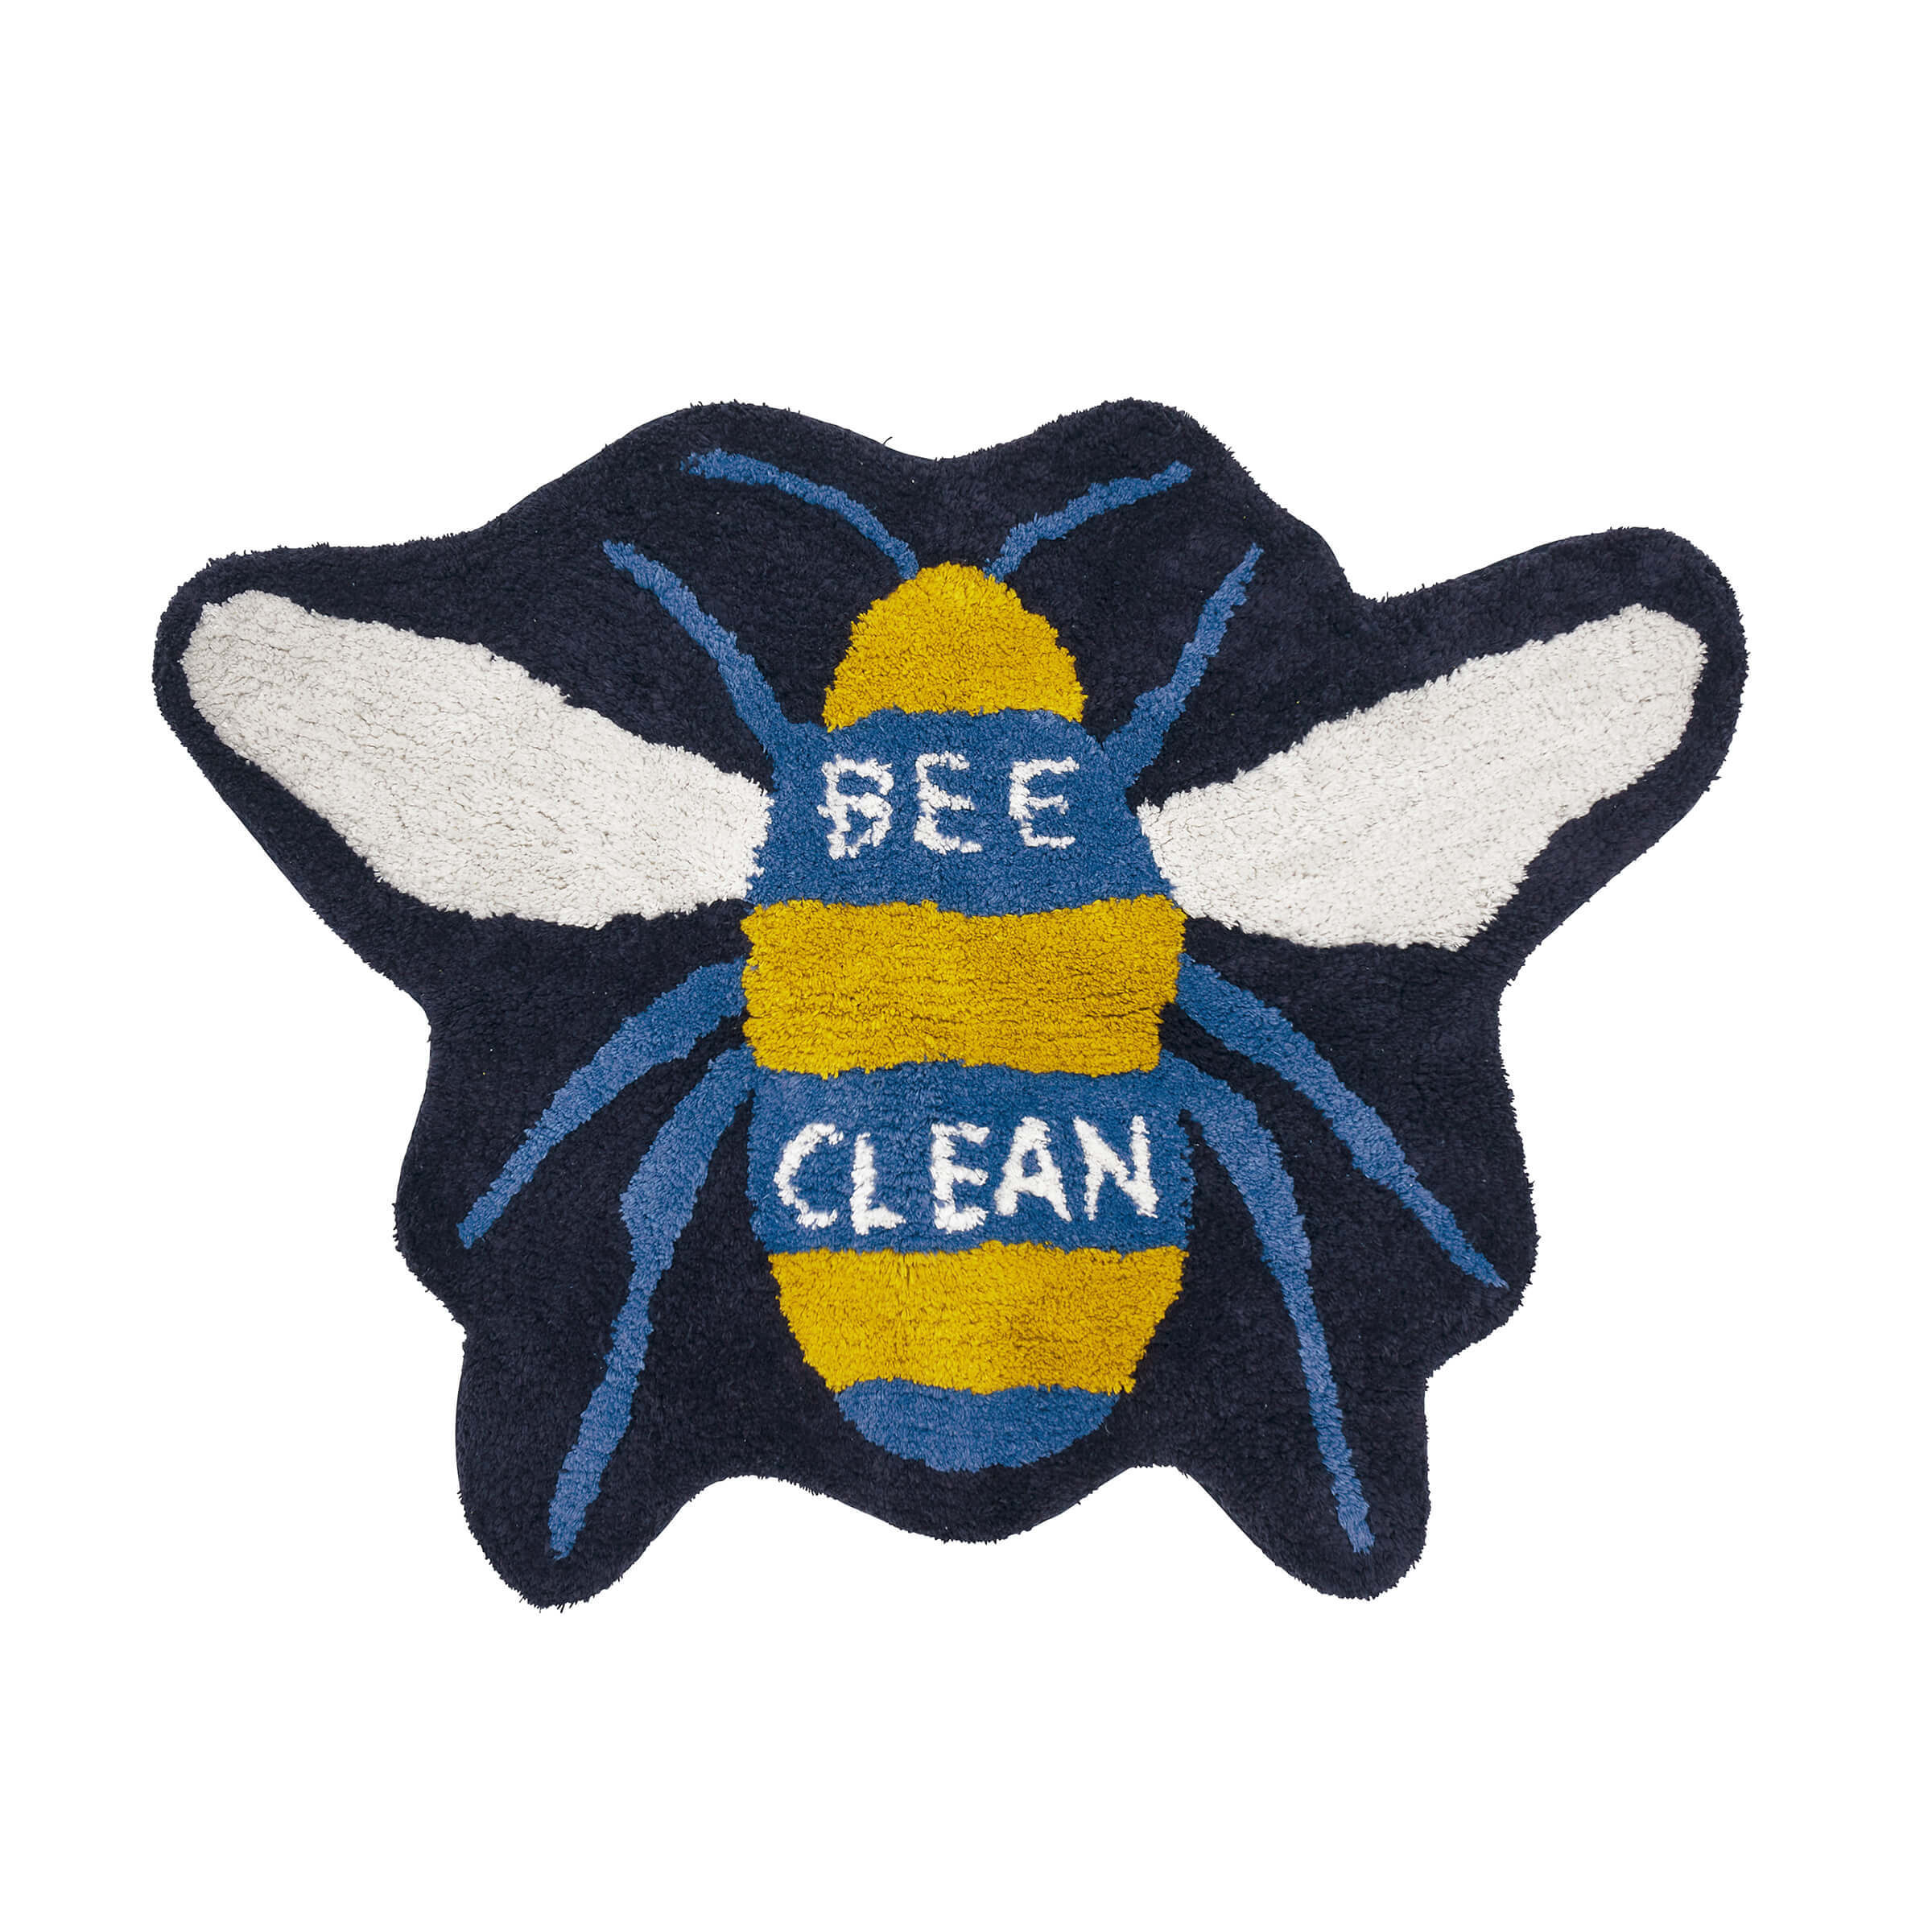 Joules Bee Clean Bath Mat, French Navy - image 1